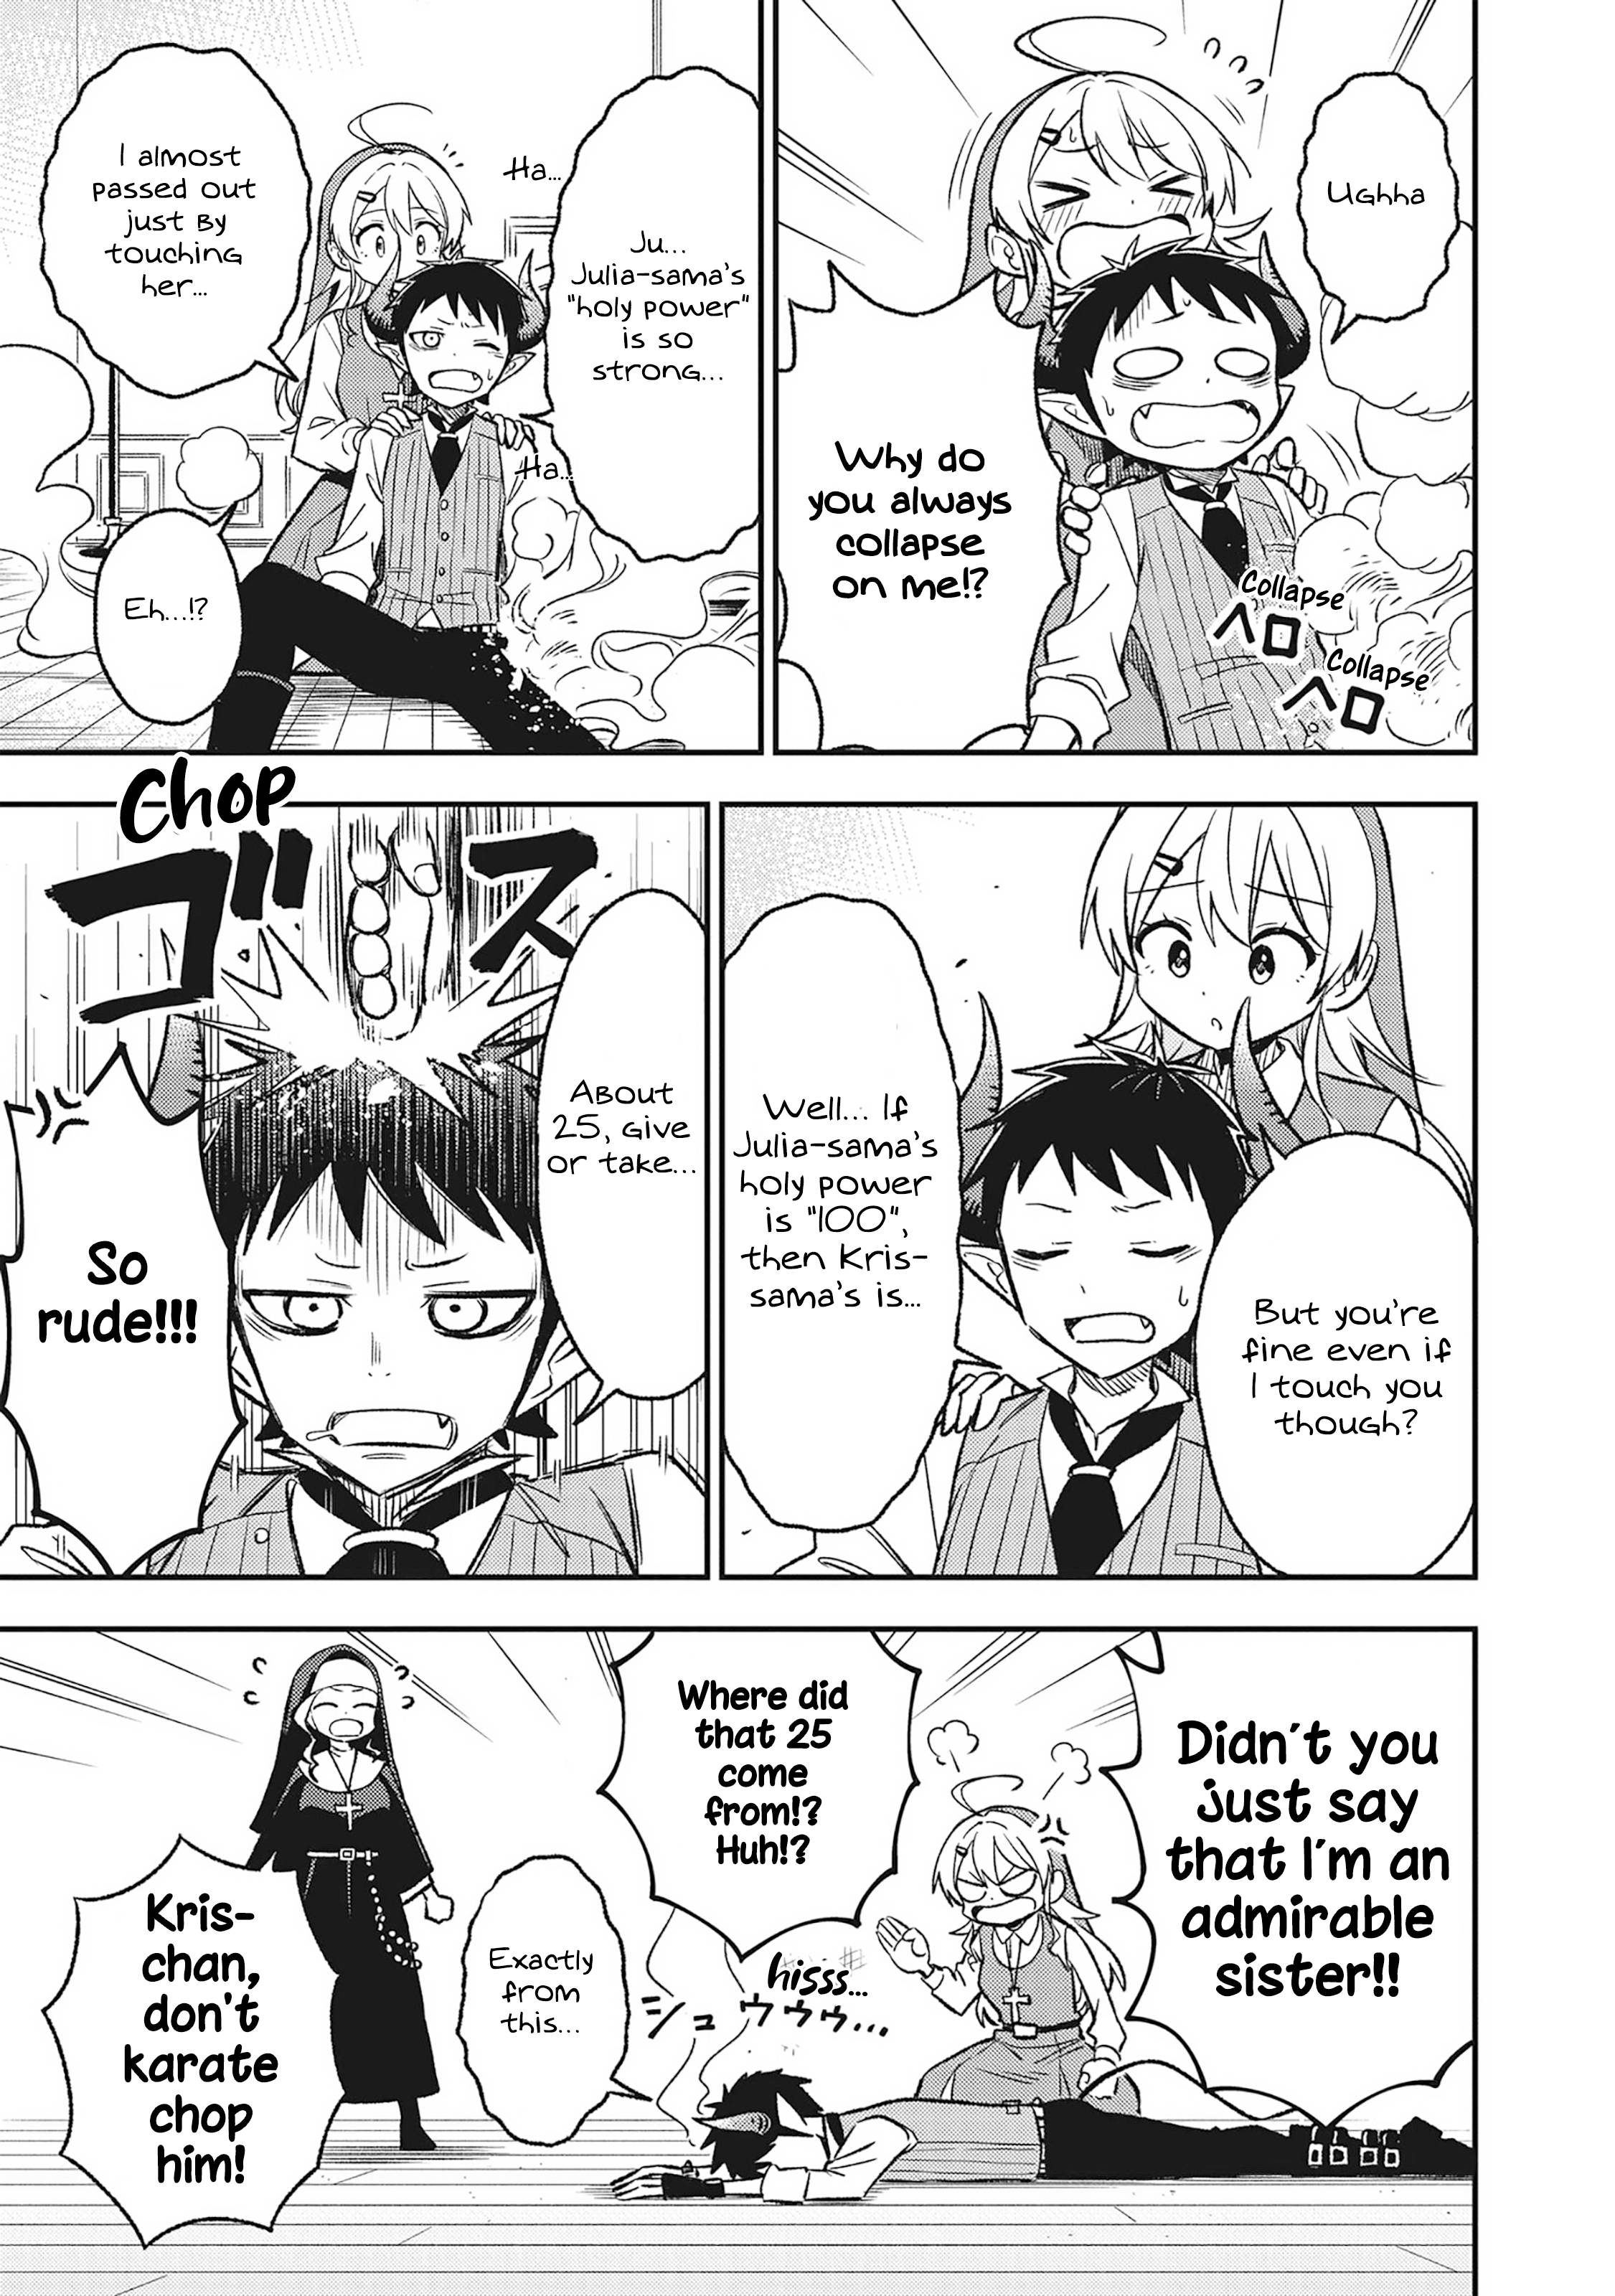 As You Wish, Sister - chapter 4 - #5